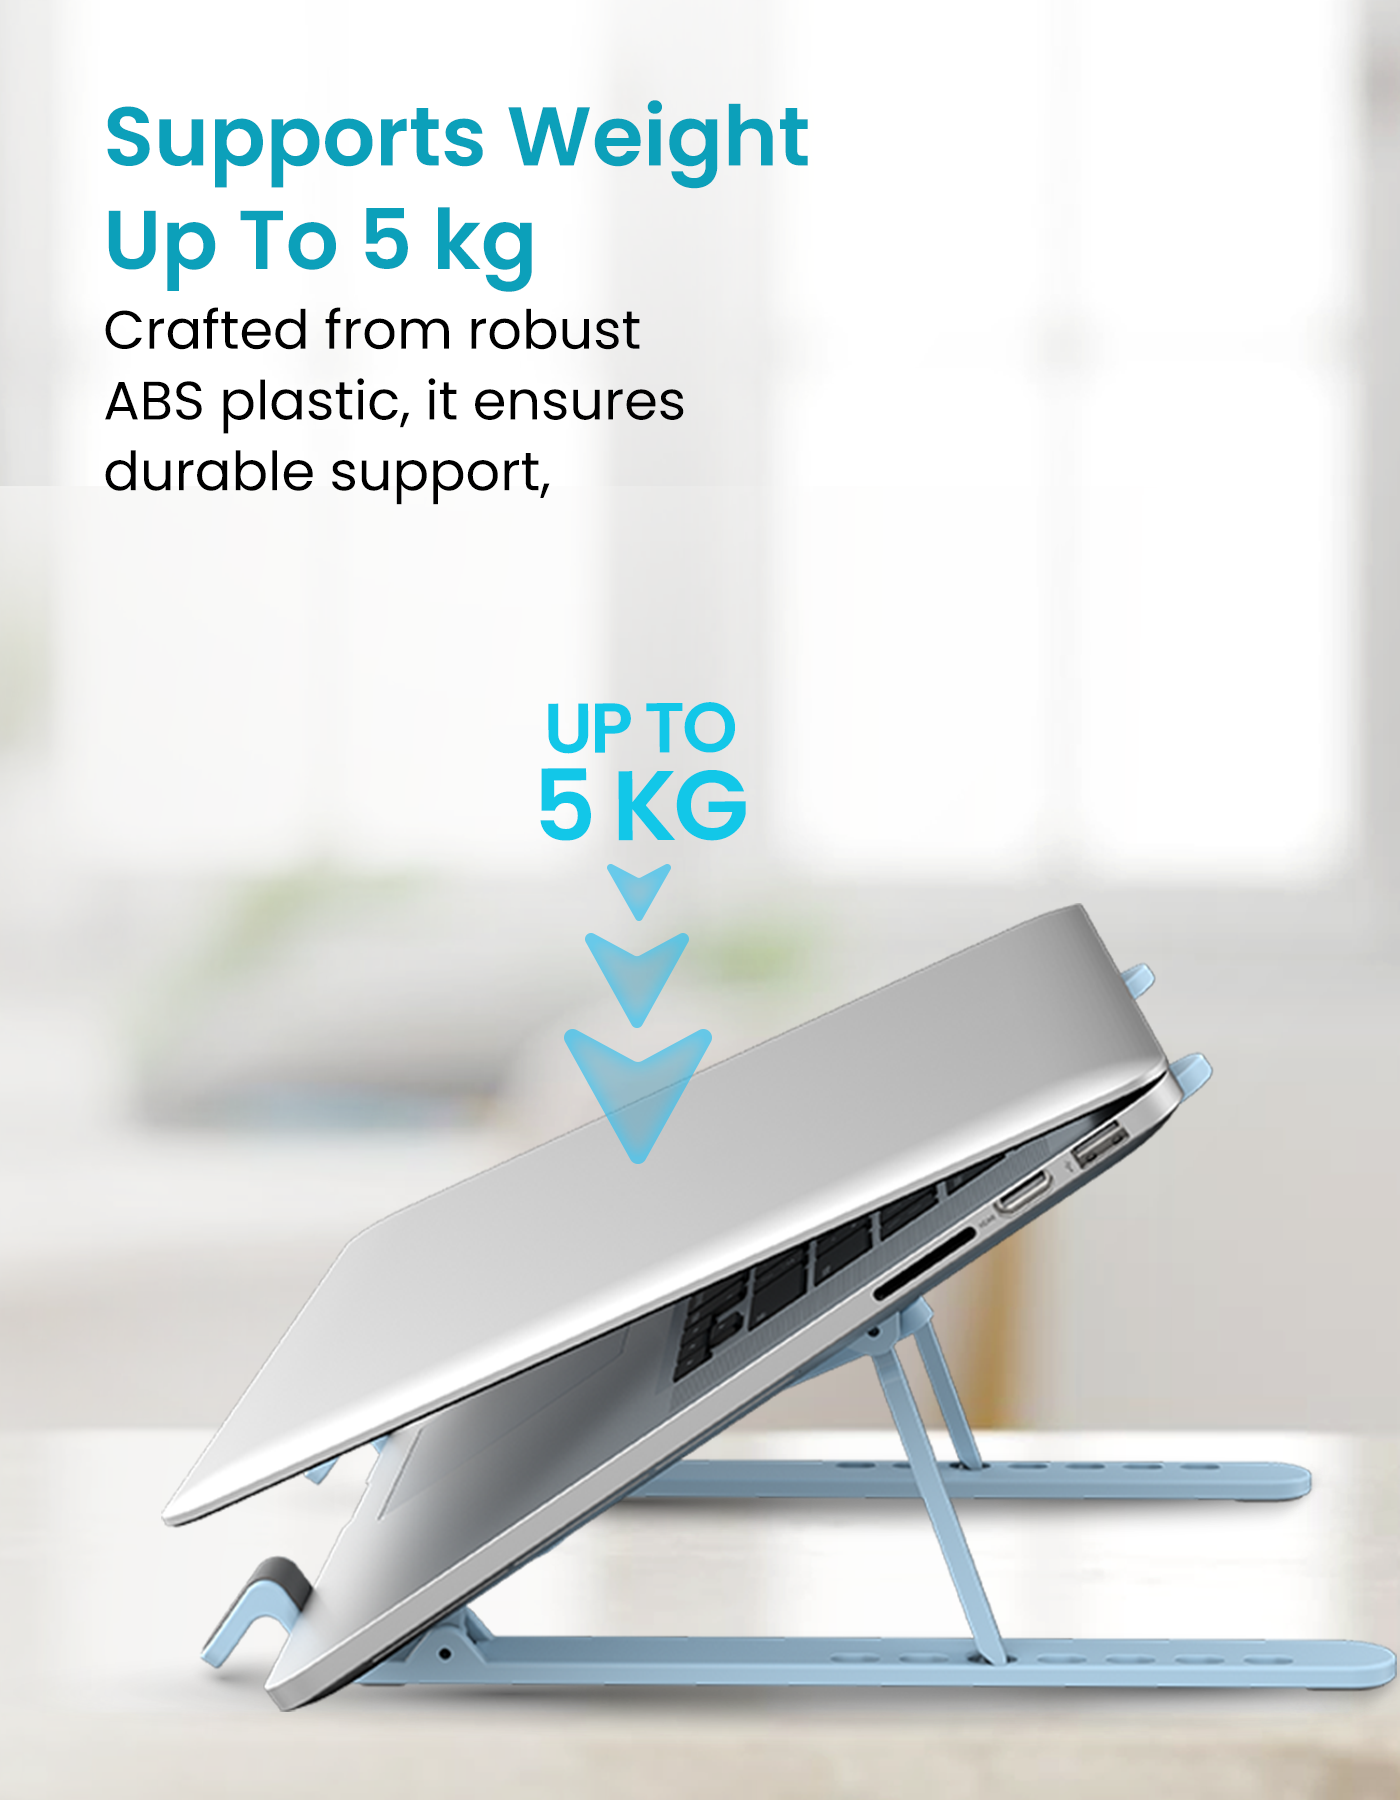 My buddy K lite portable laptop stand support up to 5kg weight